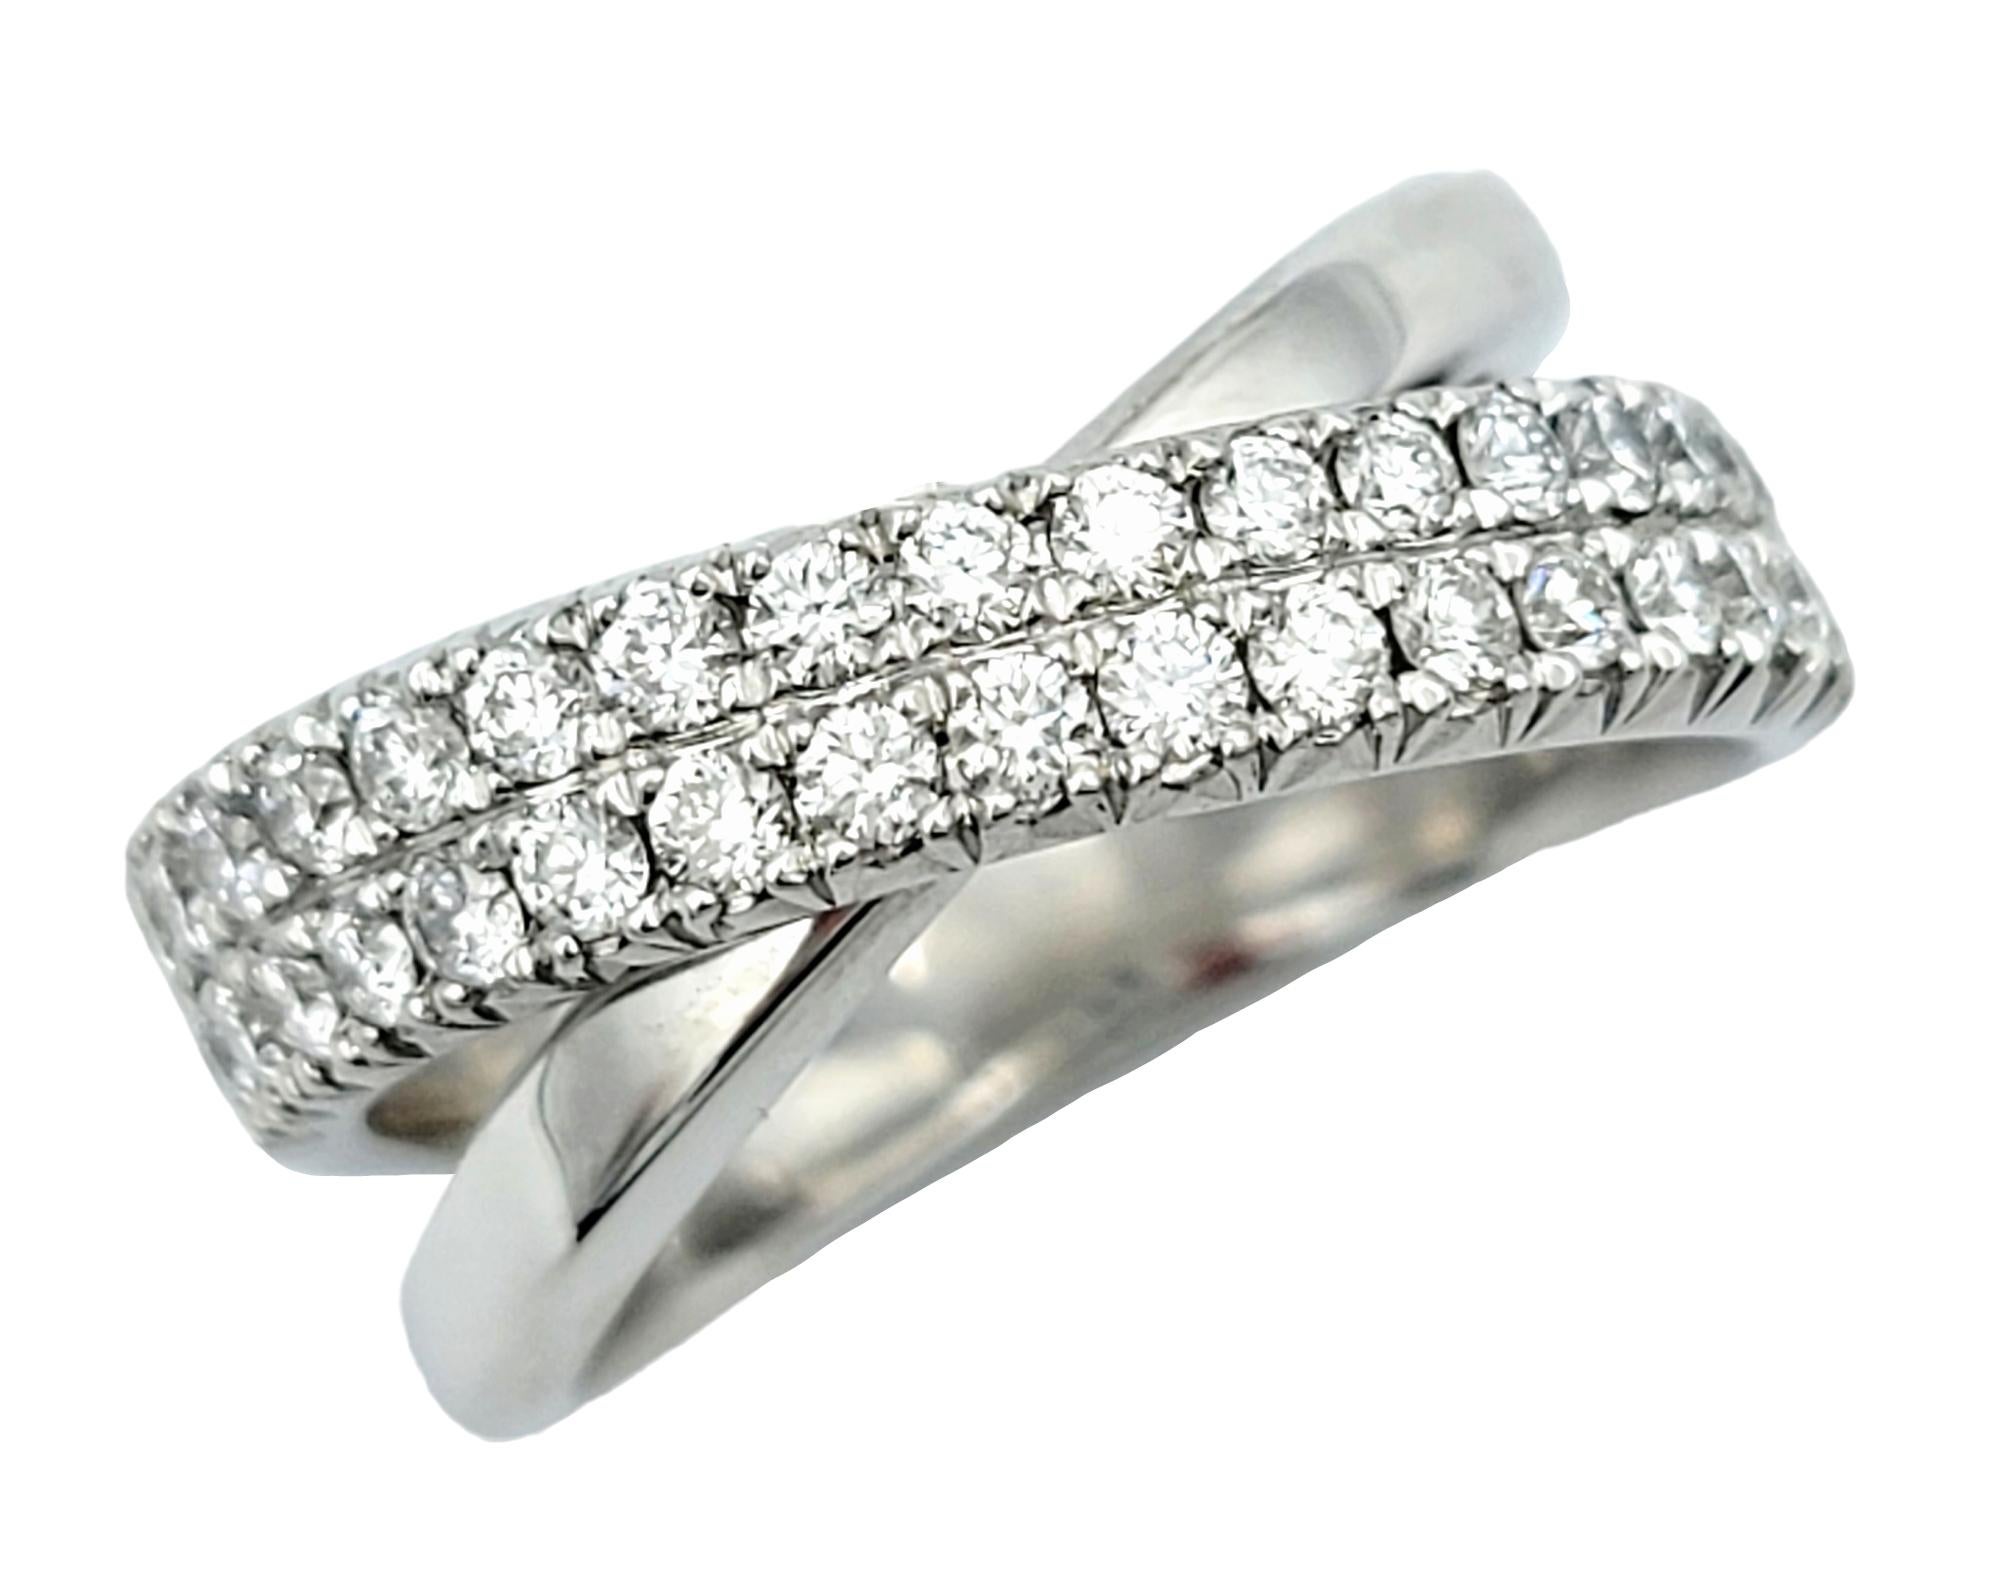 Ring size: 6

This exquisite 14 karat white gold crisscross ring is a true embodiment of elegance and sophistication. The unique design features two interlocking bands that create a visually stunning effect. One of these bands is adorned with two